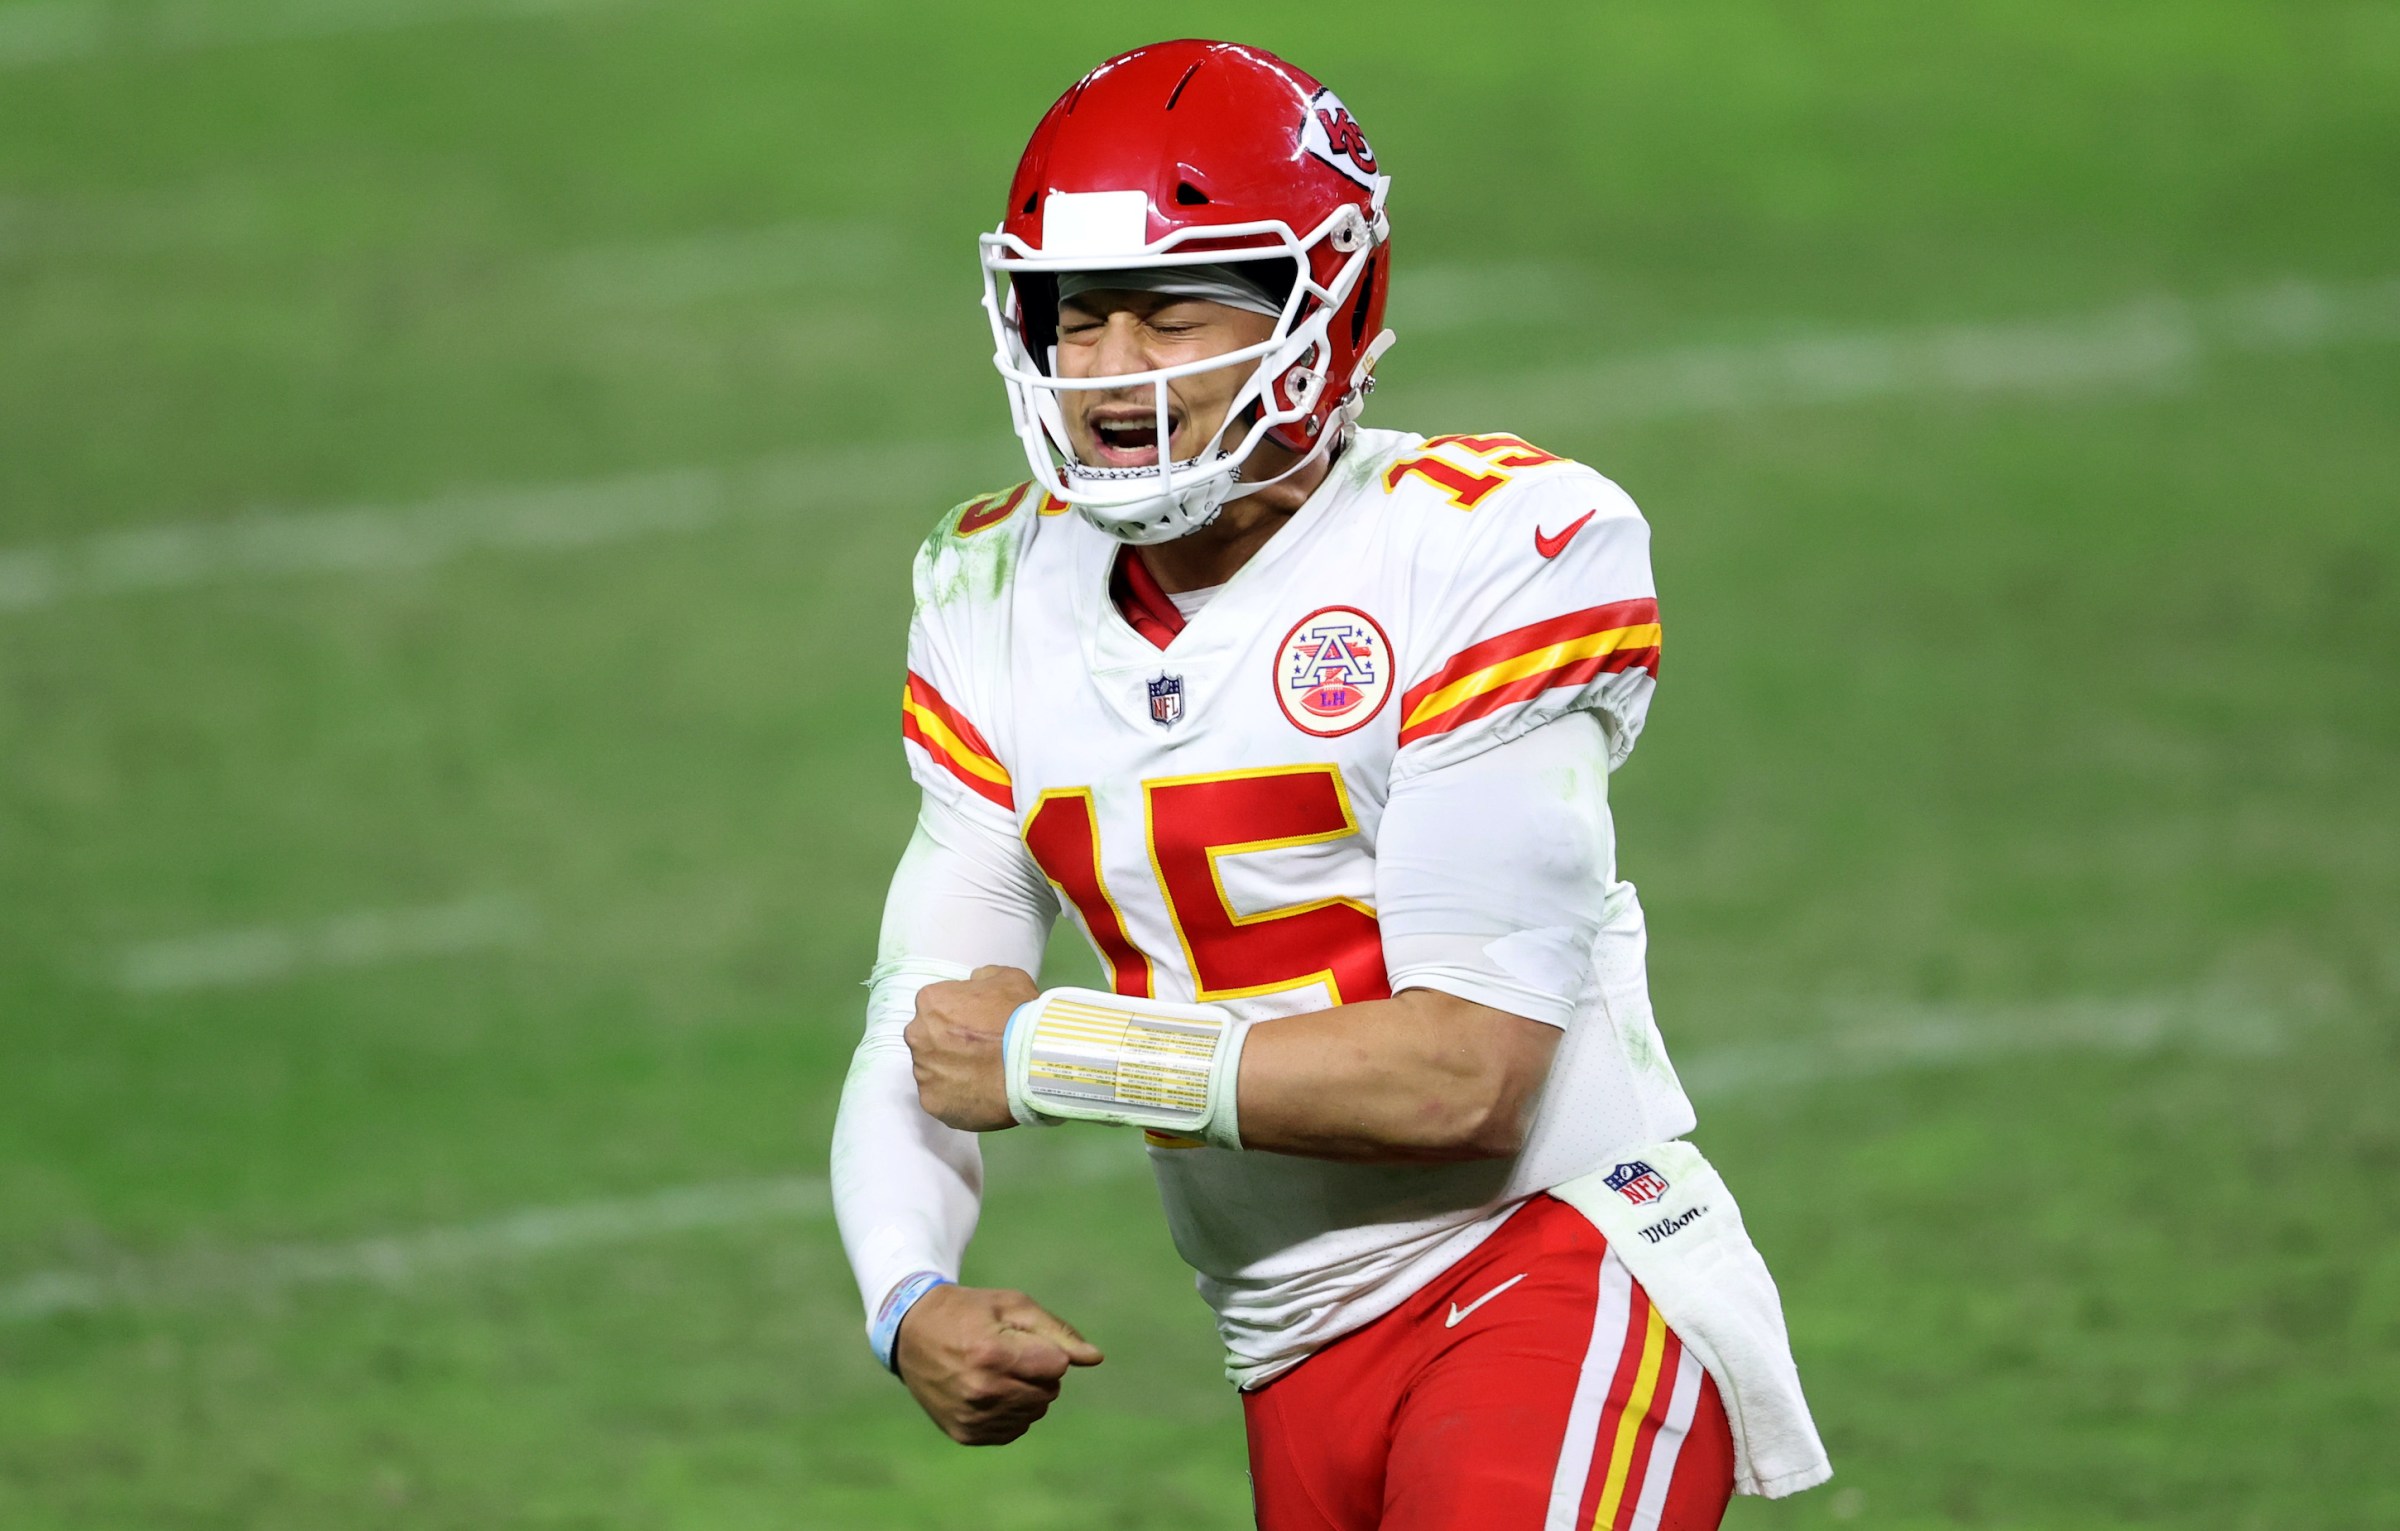 Quarterback Patrick Mahomes #15 reacts after a game winning touchdown pass to tight end Travis Kelce #87 of the Kansas City Chiefs during the second half of an NFL game against the Las Vegas Raiders at Allegiant Stadium on November 22, 2020 in Las Vegas, Nevada.